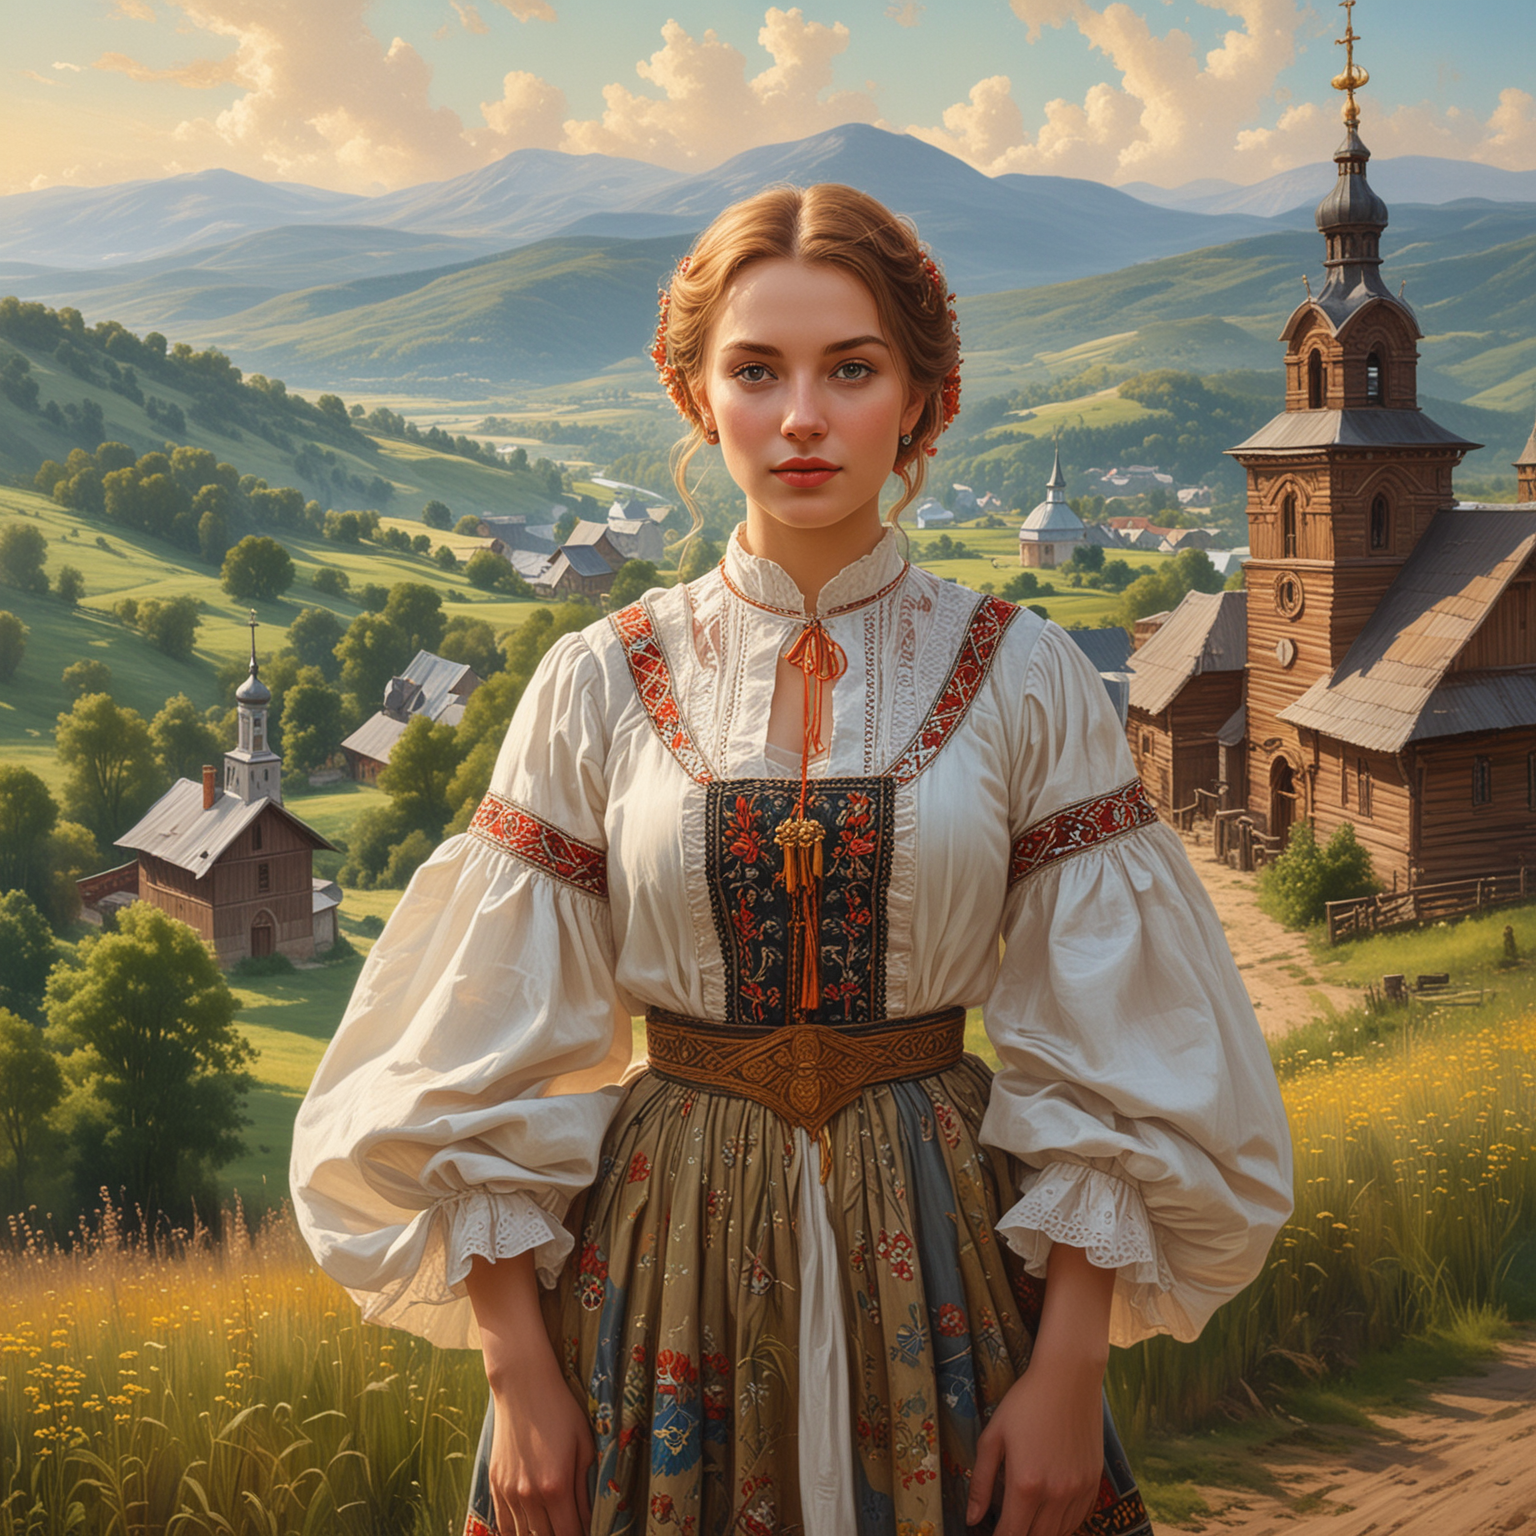 A beautiful woman, dressed in traditional Ukrainian attire from the interwar period, is the focal point of the painting. In the background, the majestic Bieszczady Mountains, and in the distance, a wooden church from the sixteenth century, which adds to the scenery a magical atmosphere and delights with its architecture and preserved historical elements. The woman’s outfit impresses with details, and the whole composition takes the viewer to an era full of charm and mystery. An aura of magic floats in the air, giving the scene a unique, almost fairy-tale character.